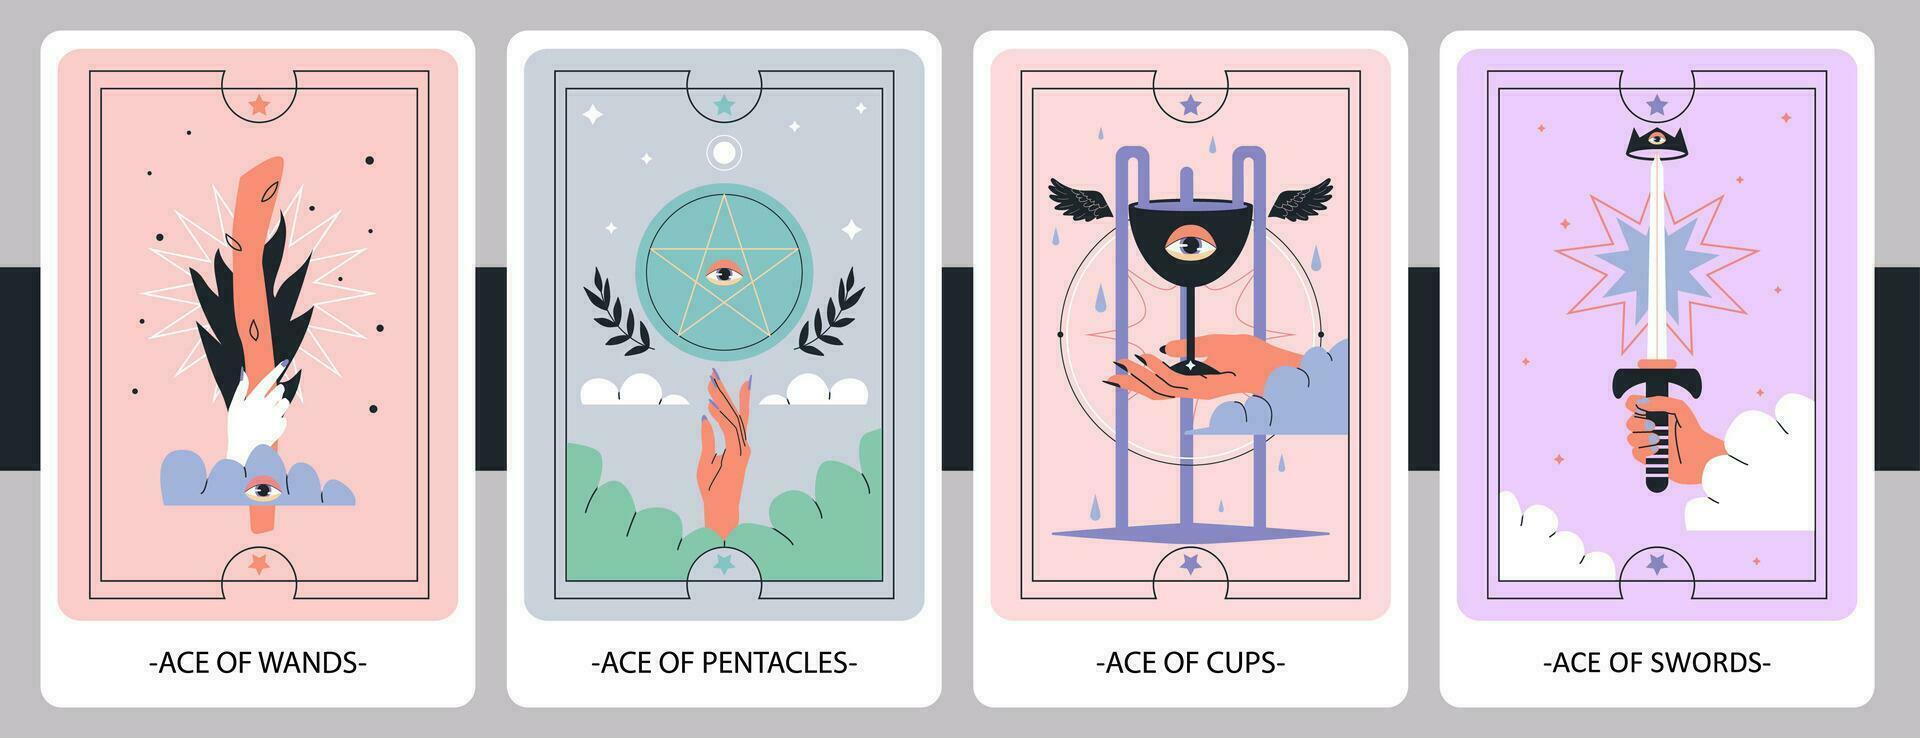 The Minor Arcana, aces of wands, pentacles, cups and swords. Hand-draw vector illustration. Eps 10.